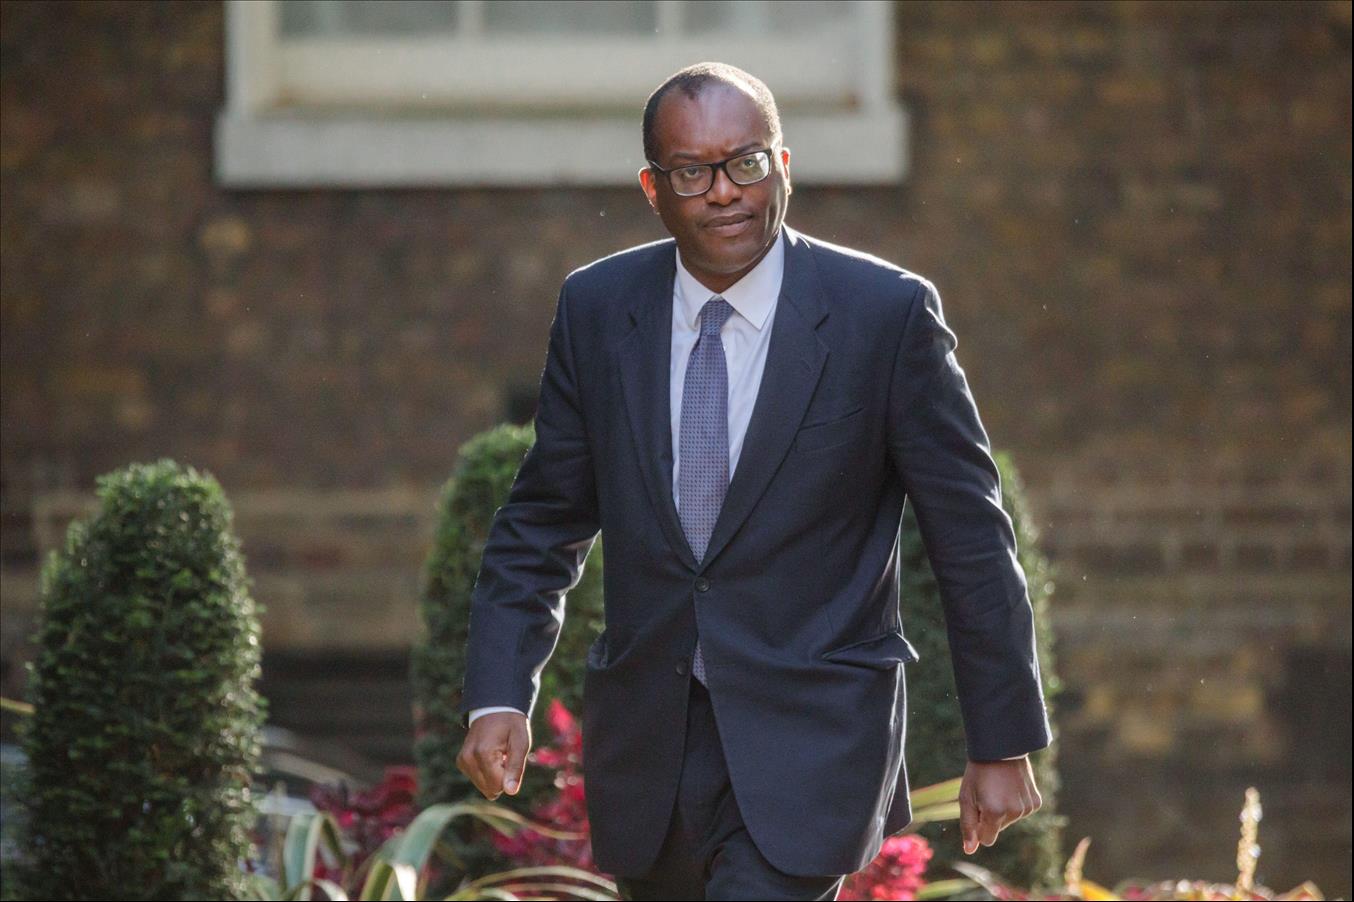 Mini Budget: Will Kwasi Kwarteng's Plan Deliver Growth?